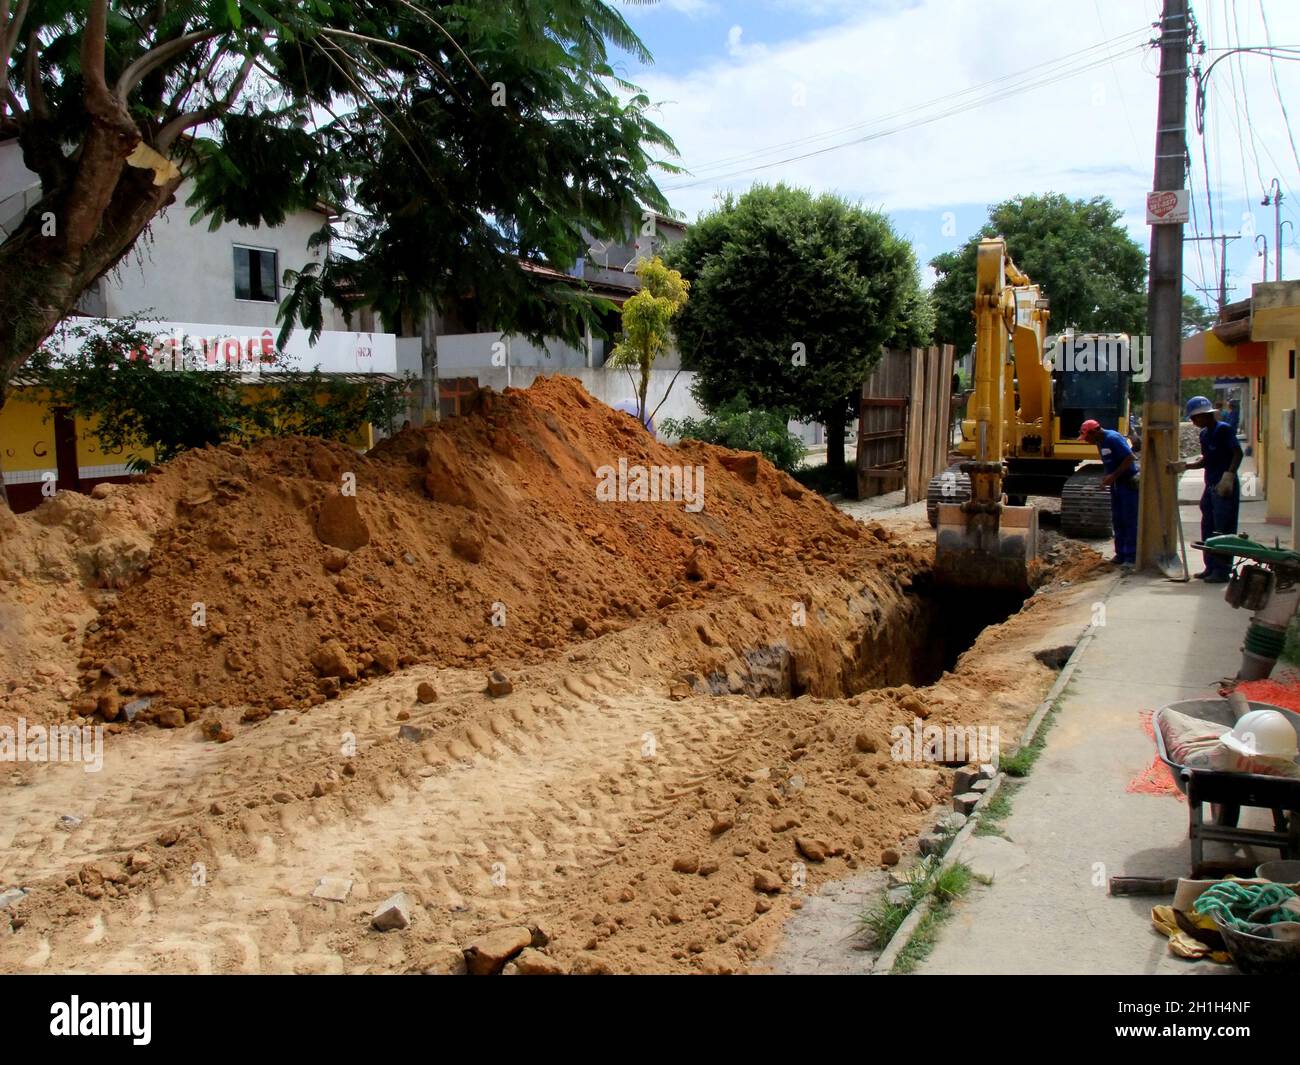 eunapolis, bahia / brazil - november 17, 2010: backhoe machine works on the implementation of a sewage network on a street in the city of Eunapolis, i Stock Photo